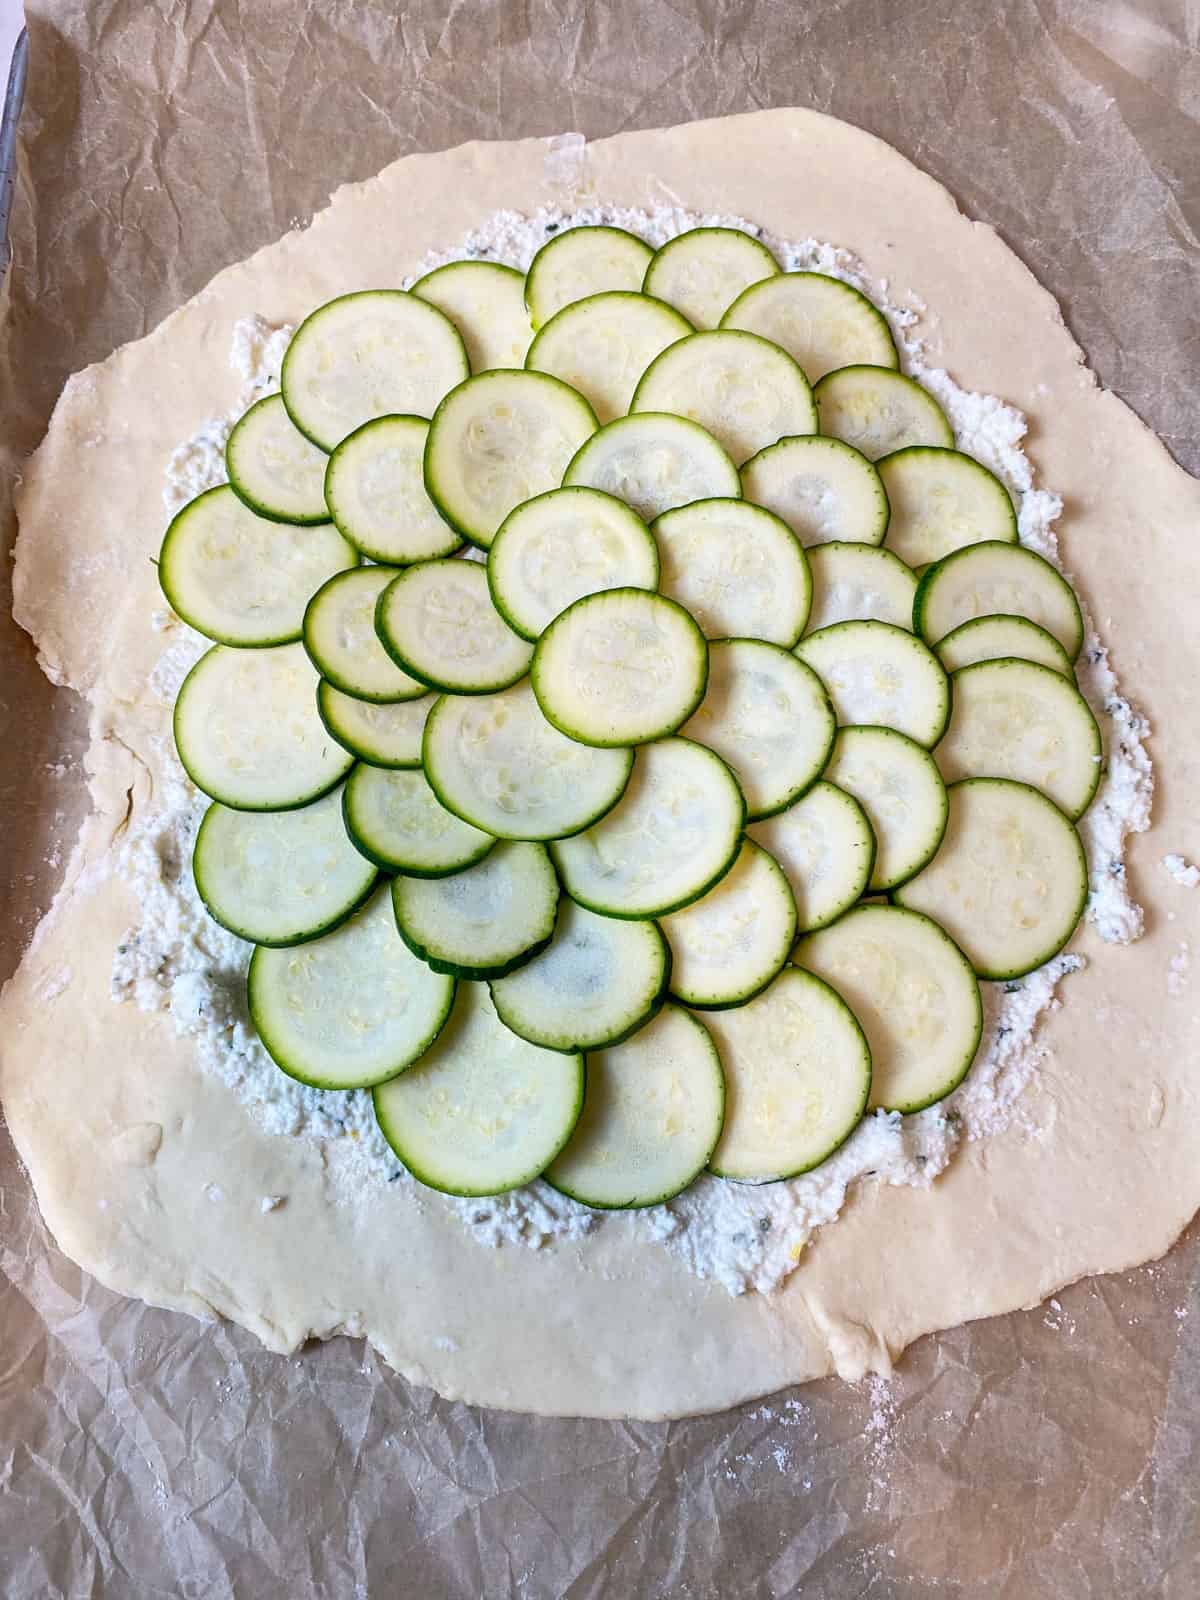 Layer the zucchini slices on top of the ricotta mixture.